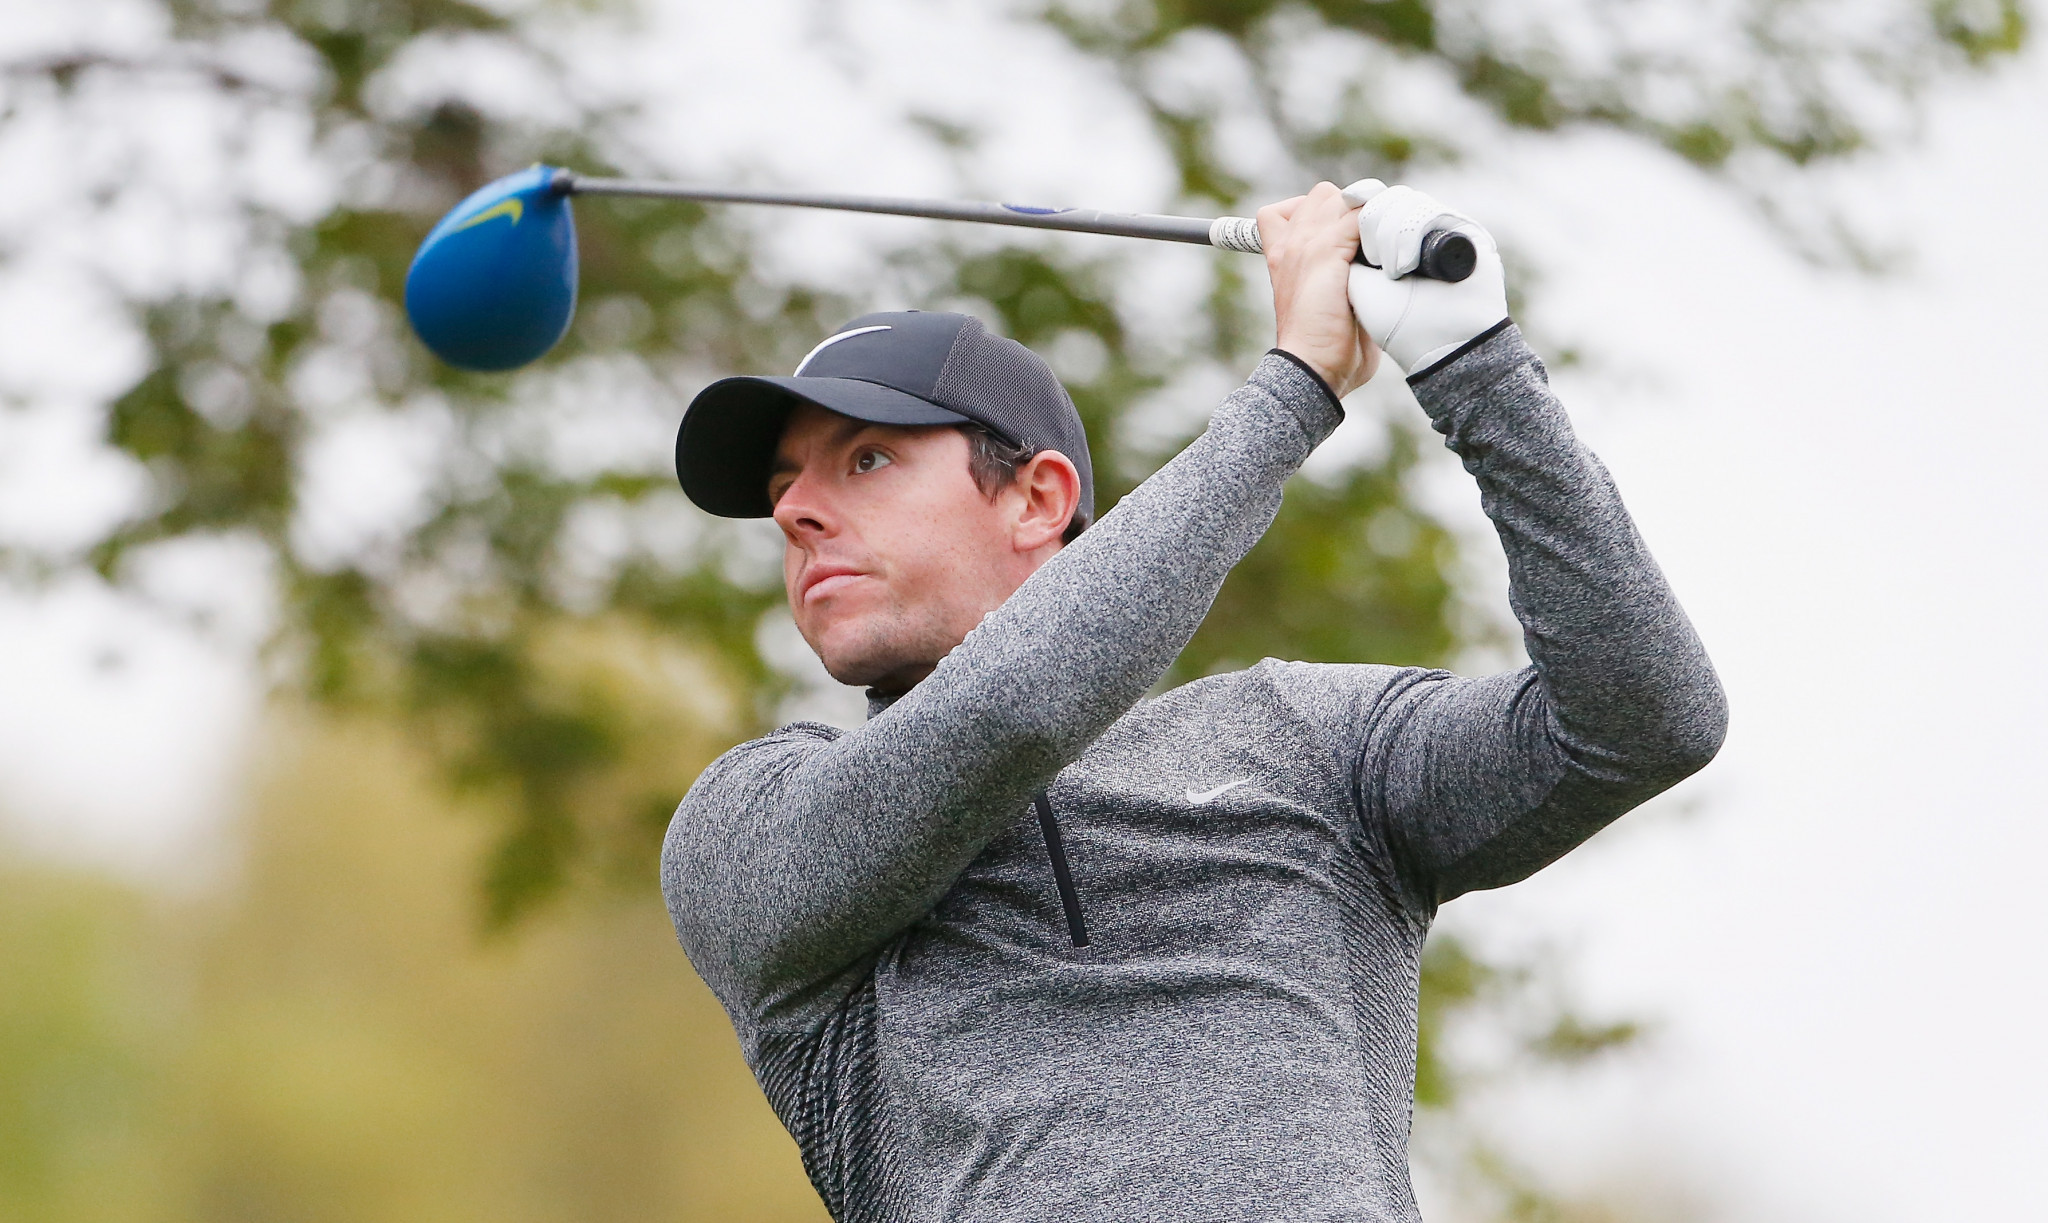 Rory McIlroy's comments before Rio 2016 that not only would he not play in golf's first event at the Olympics since 1904 but he would probably not even watch it on television was, in Peter Dawson's view, "certainly not helpful" ©Getty Images